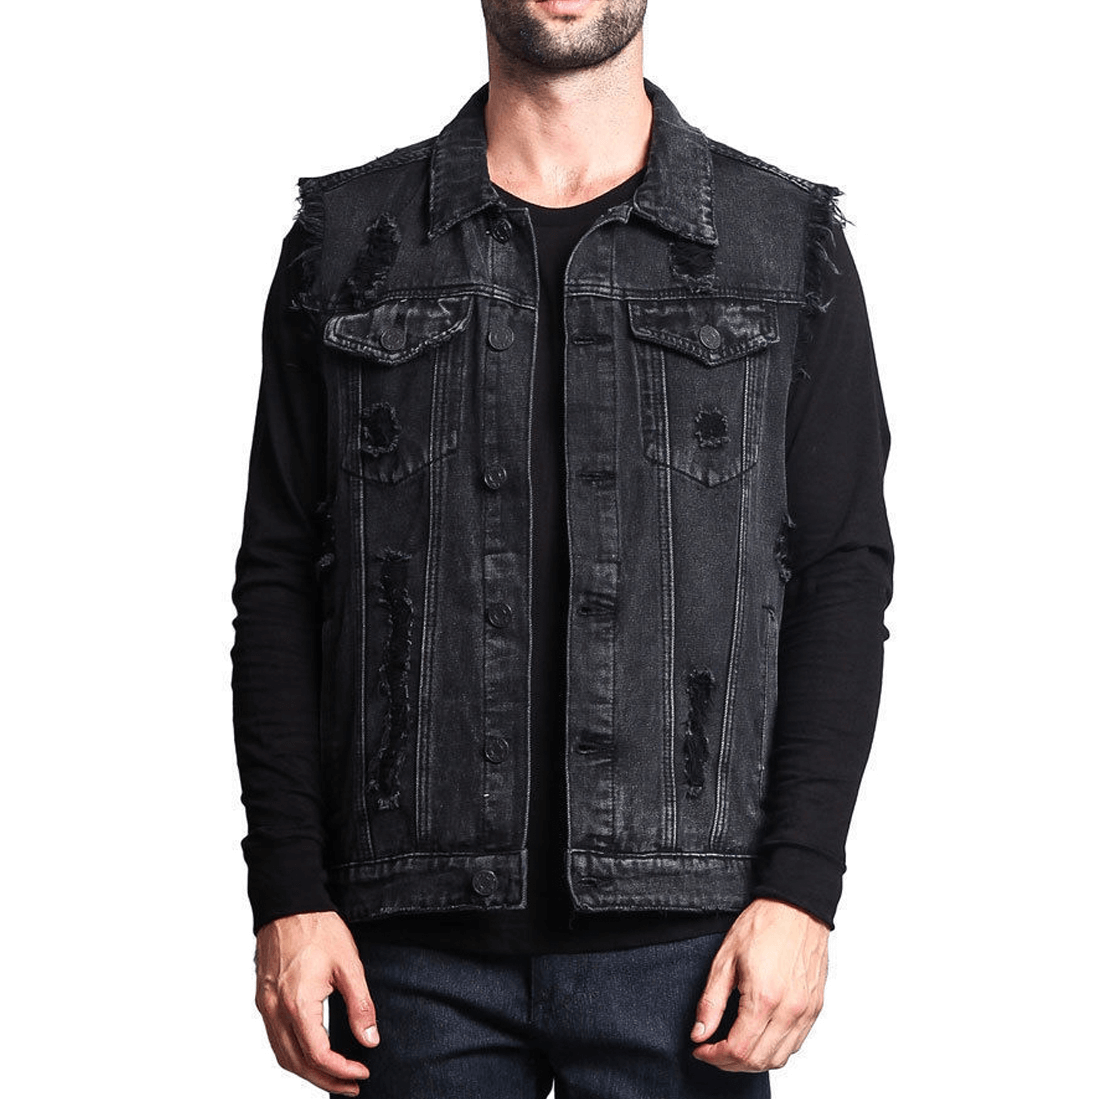 Vintage Denim Sleeveless Jacket for Men / Male Ripped Vest with Buttons - HARD'N'HEAVY